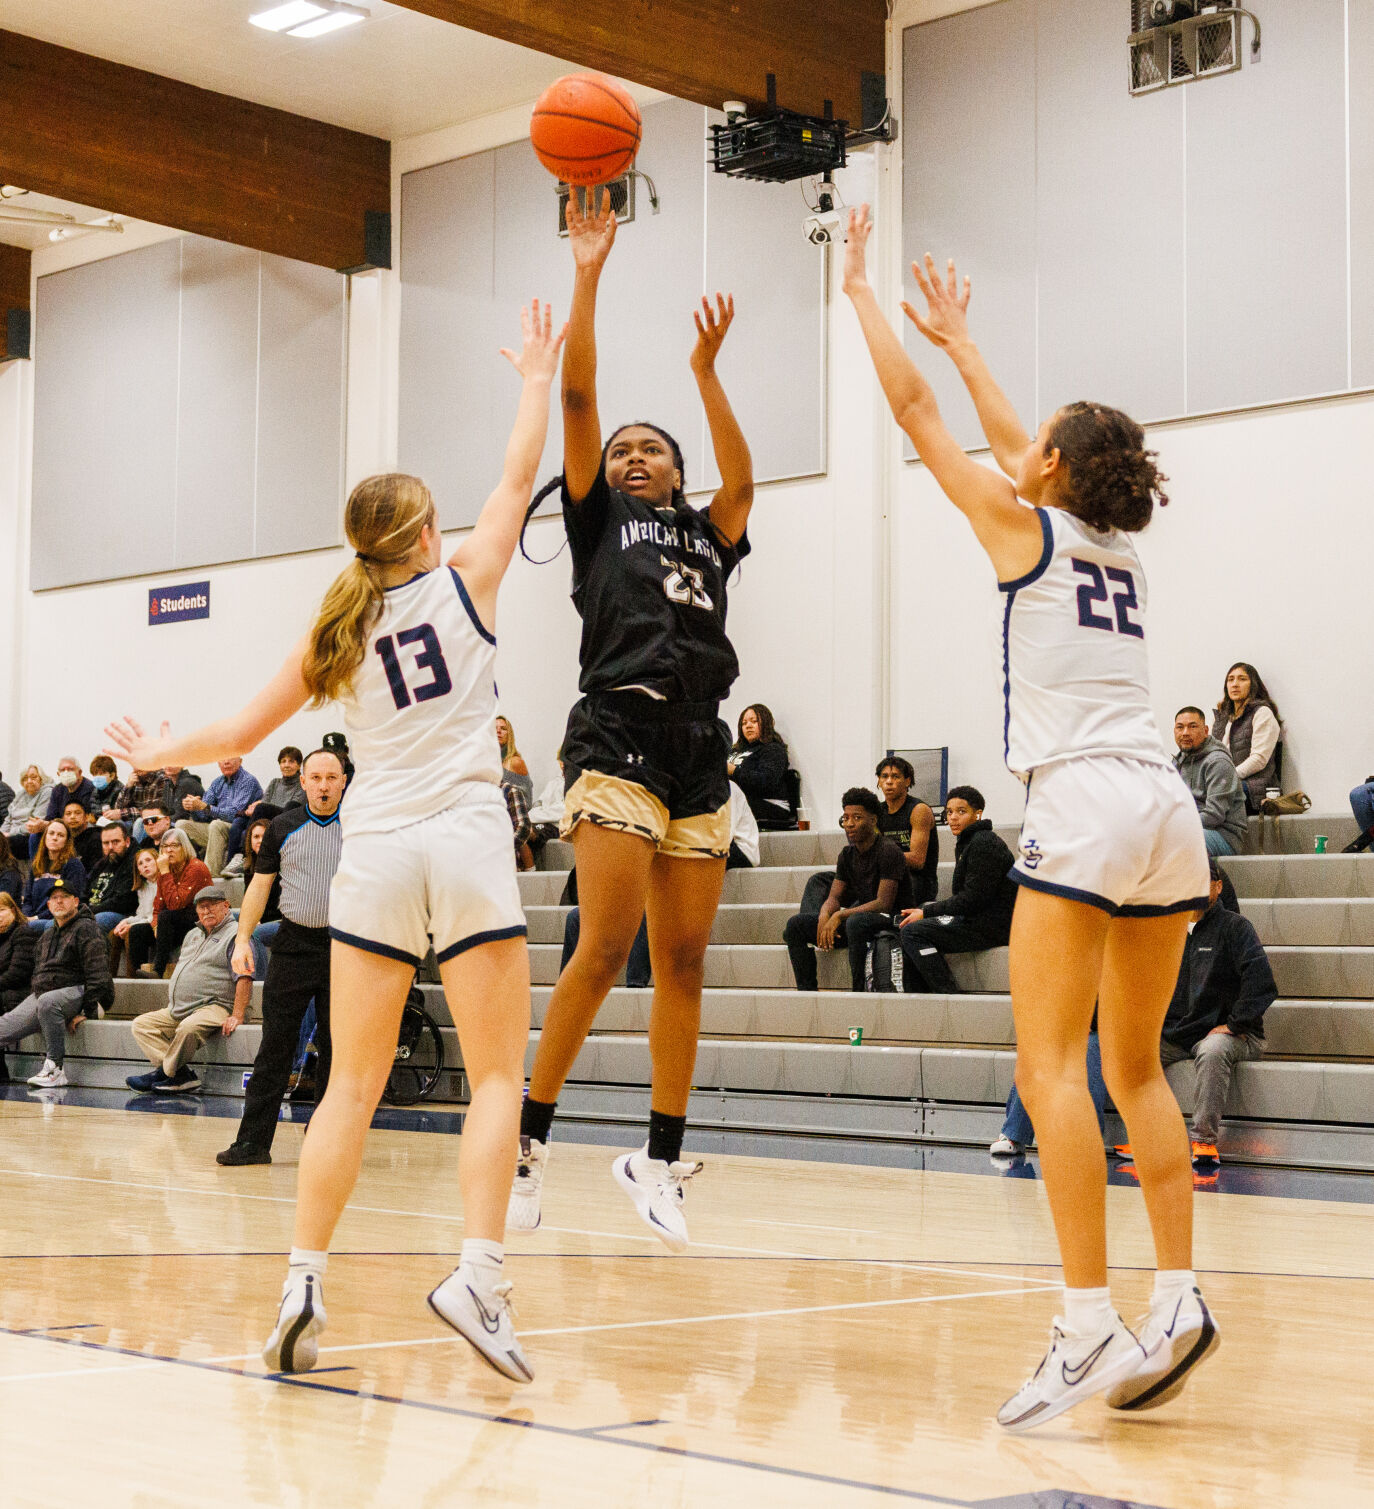 American Canyon High girls secure historic postseason win over Sonoma Valley with standout performances from Jordan Woodson and Nayonni Mitchell